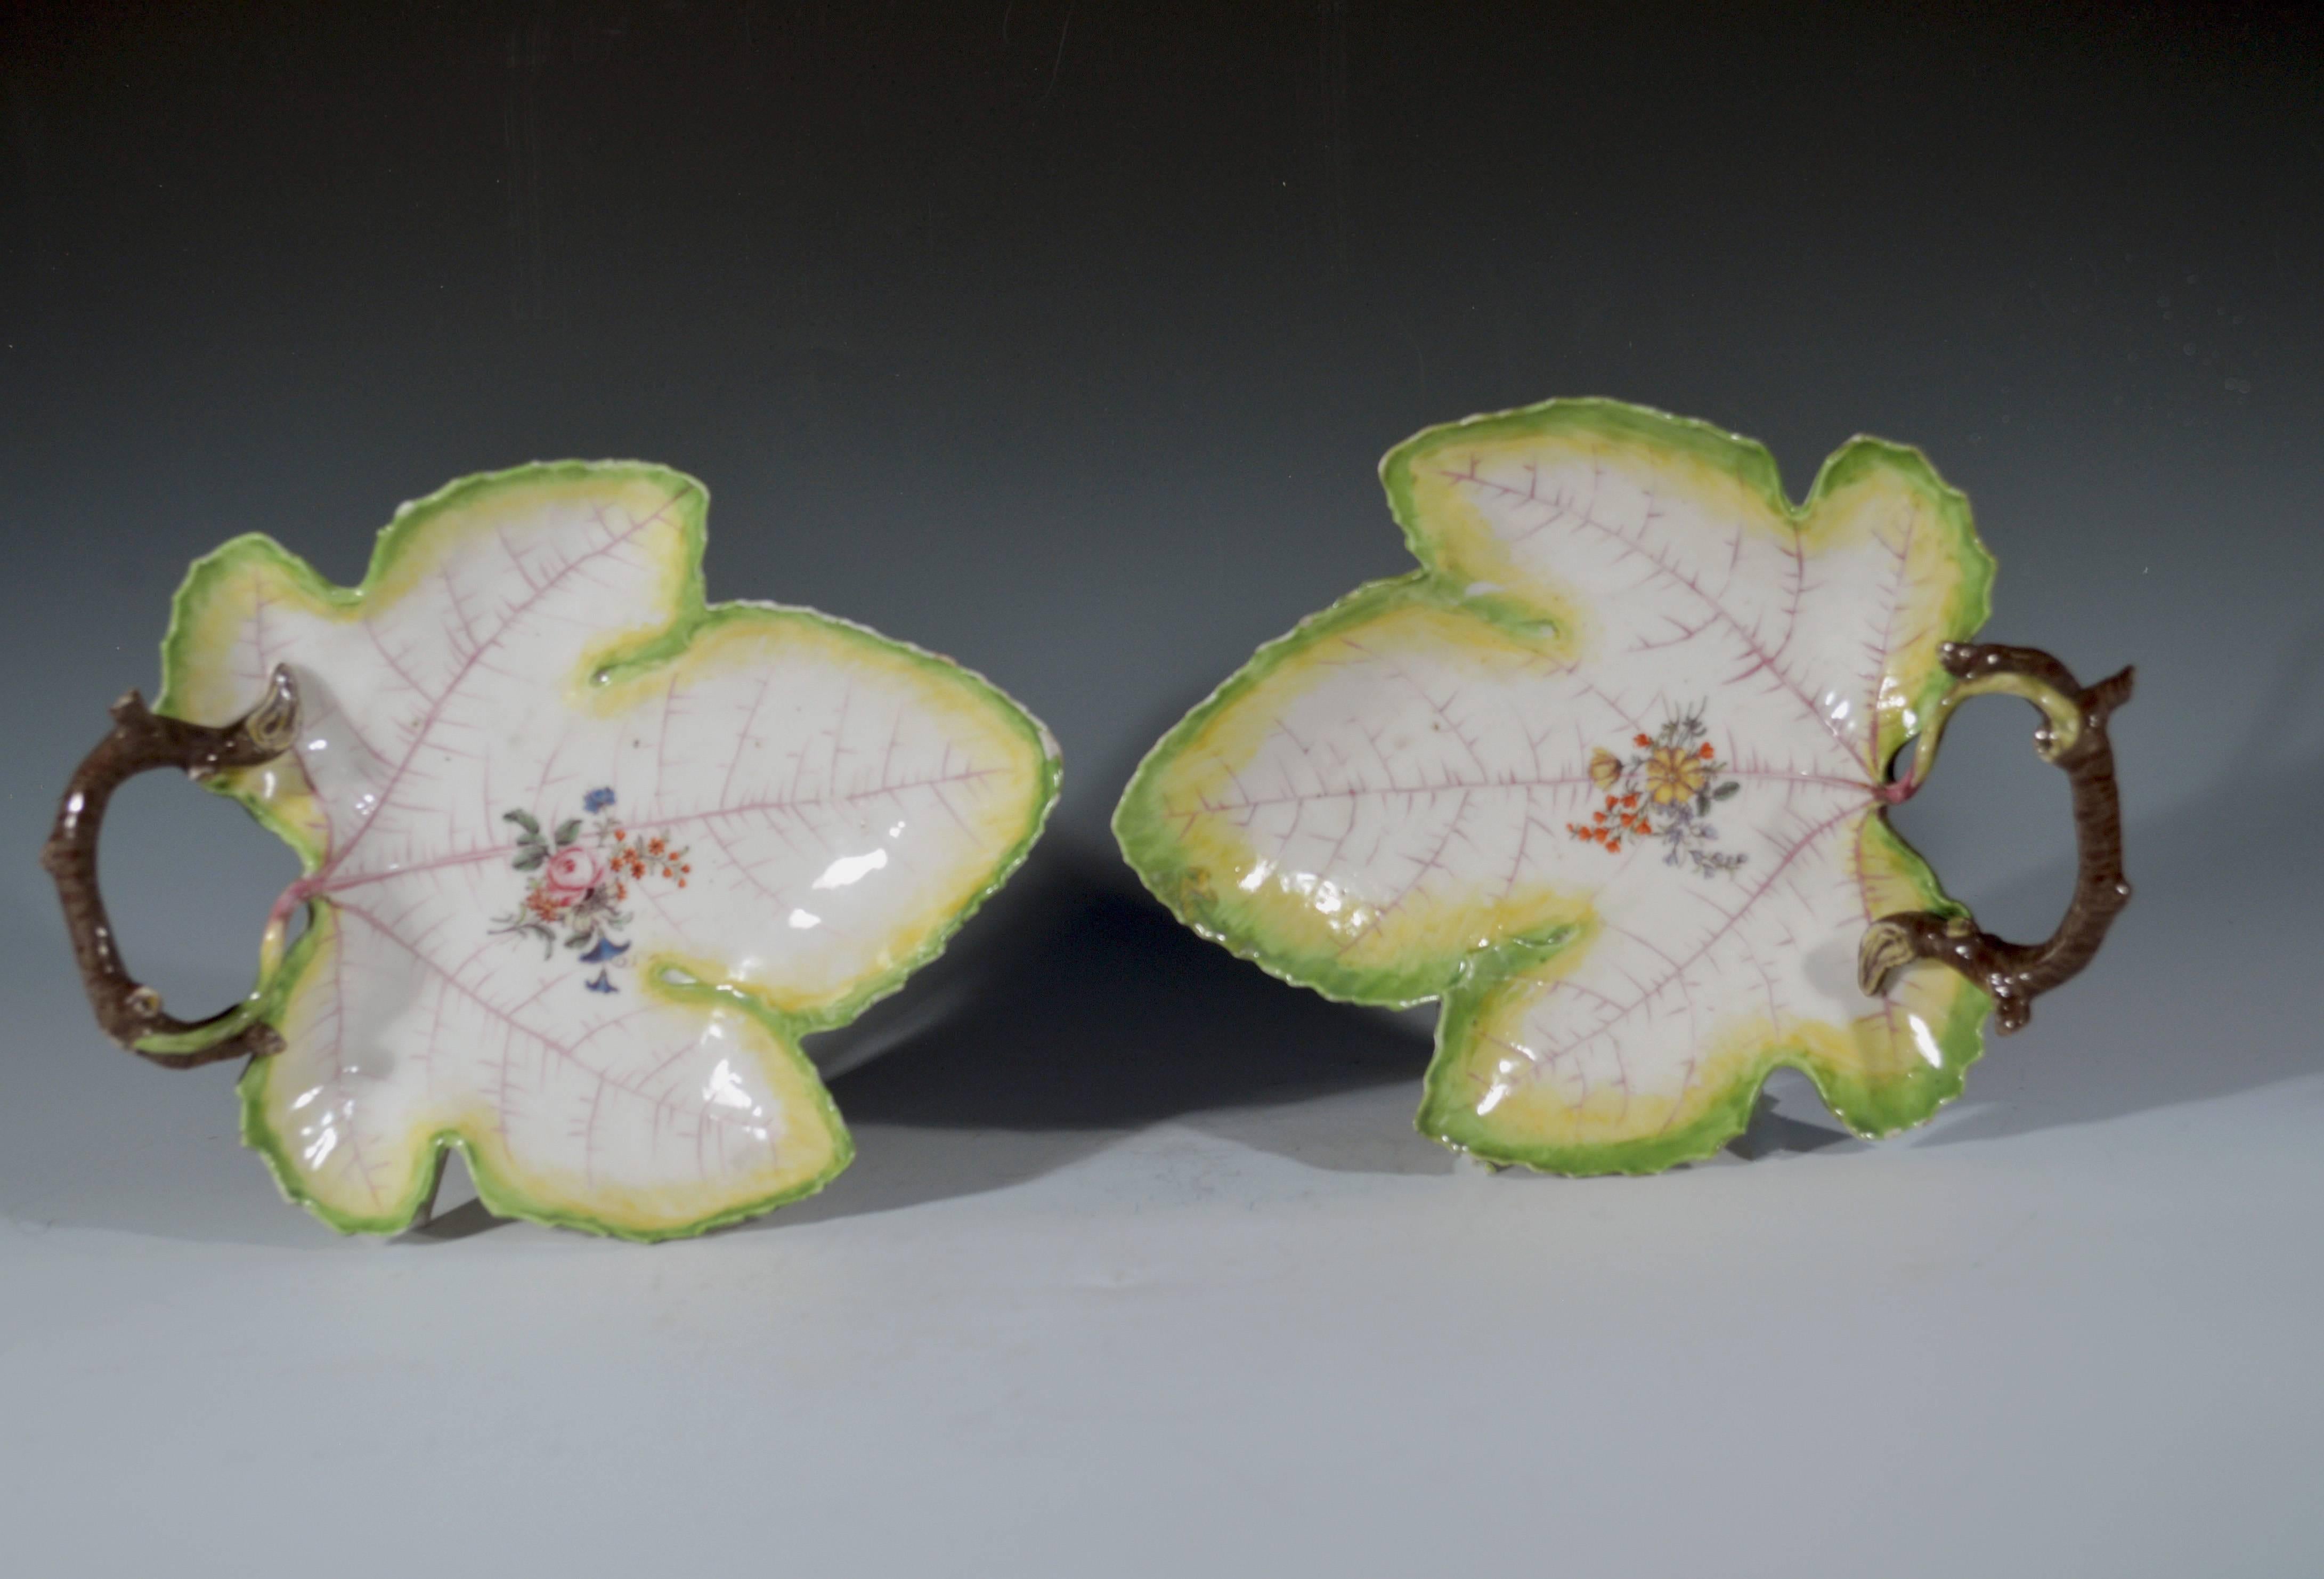 Chelsea porcelain pair of trompe L'oeil grape leaf dishes,
Red Anchor period,
circa 1755

The Chelsea porcelain dish is in the form of a grape leaf with serrated rim and is painted in the centre with a floral bouquet superimposed on a network of